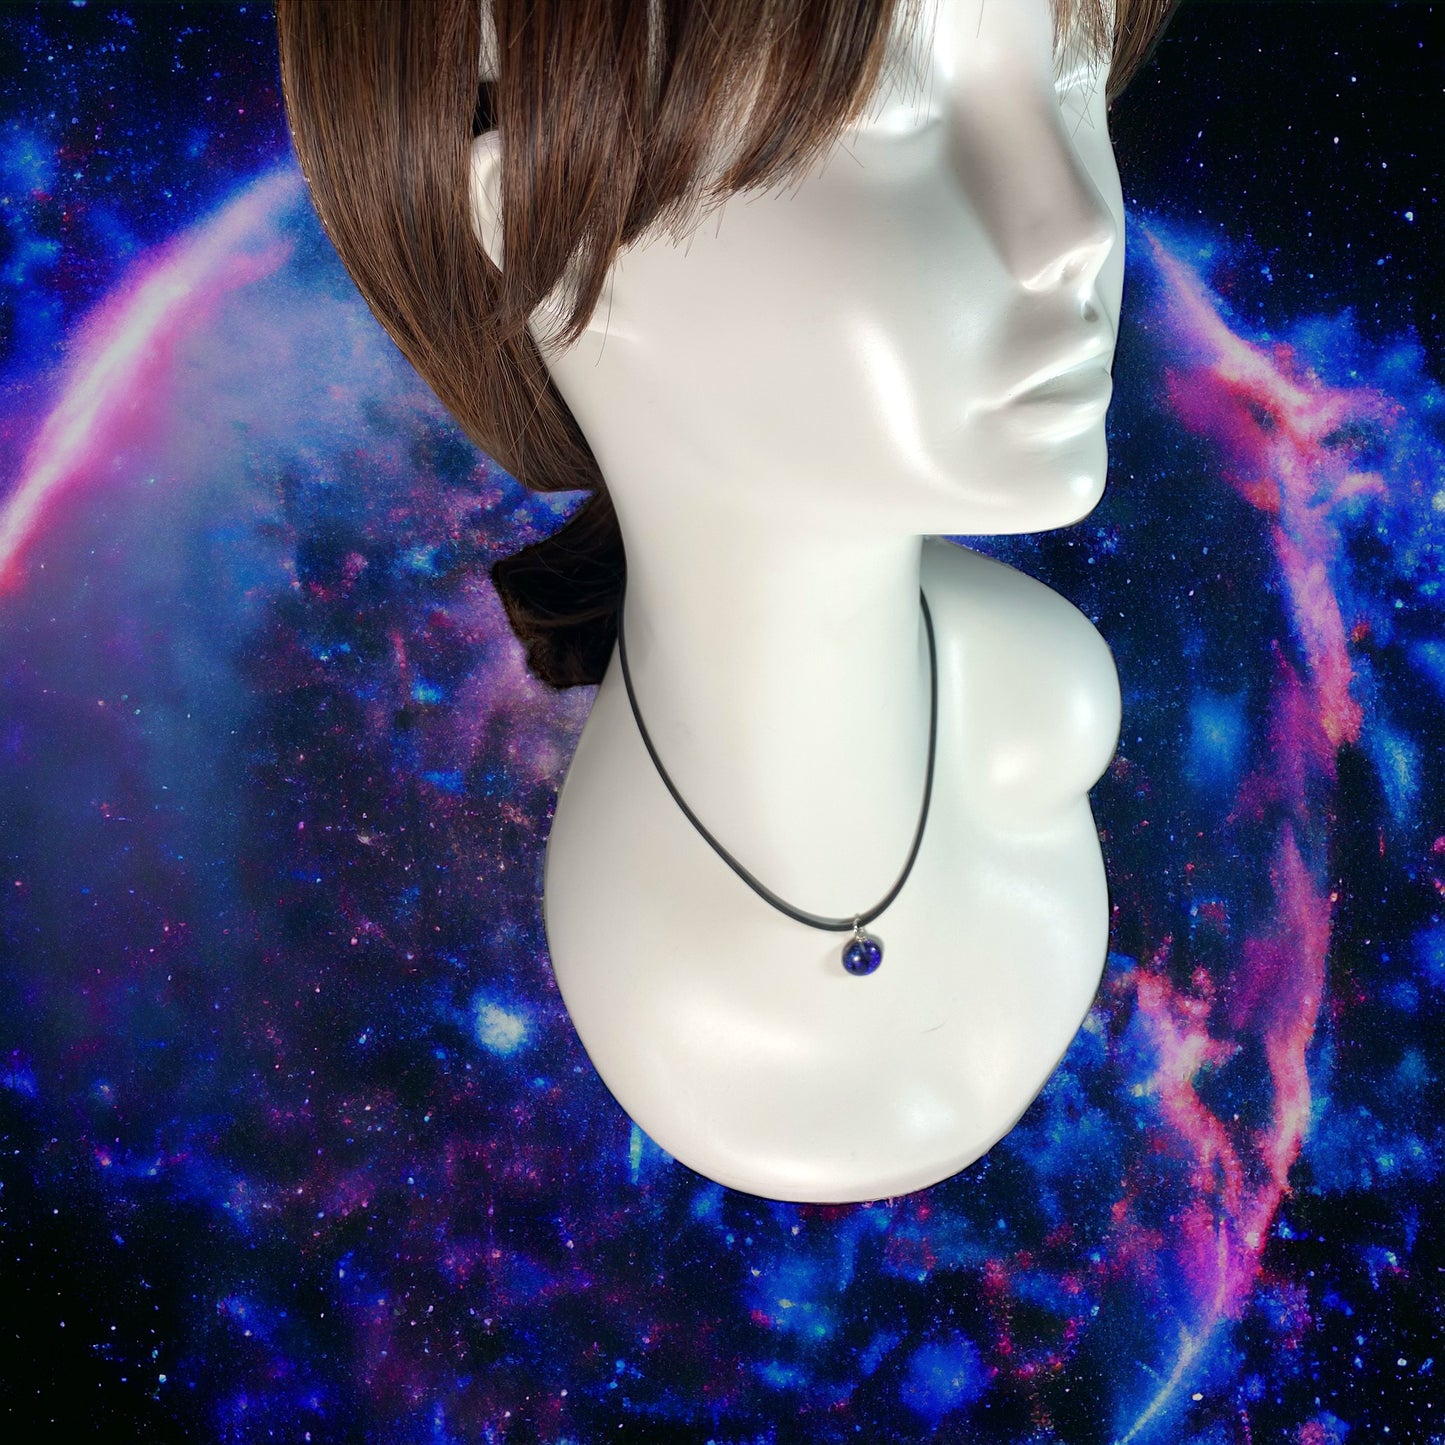 Space Ball Necklace in Grape